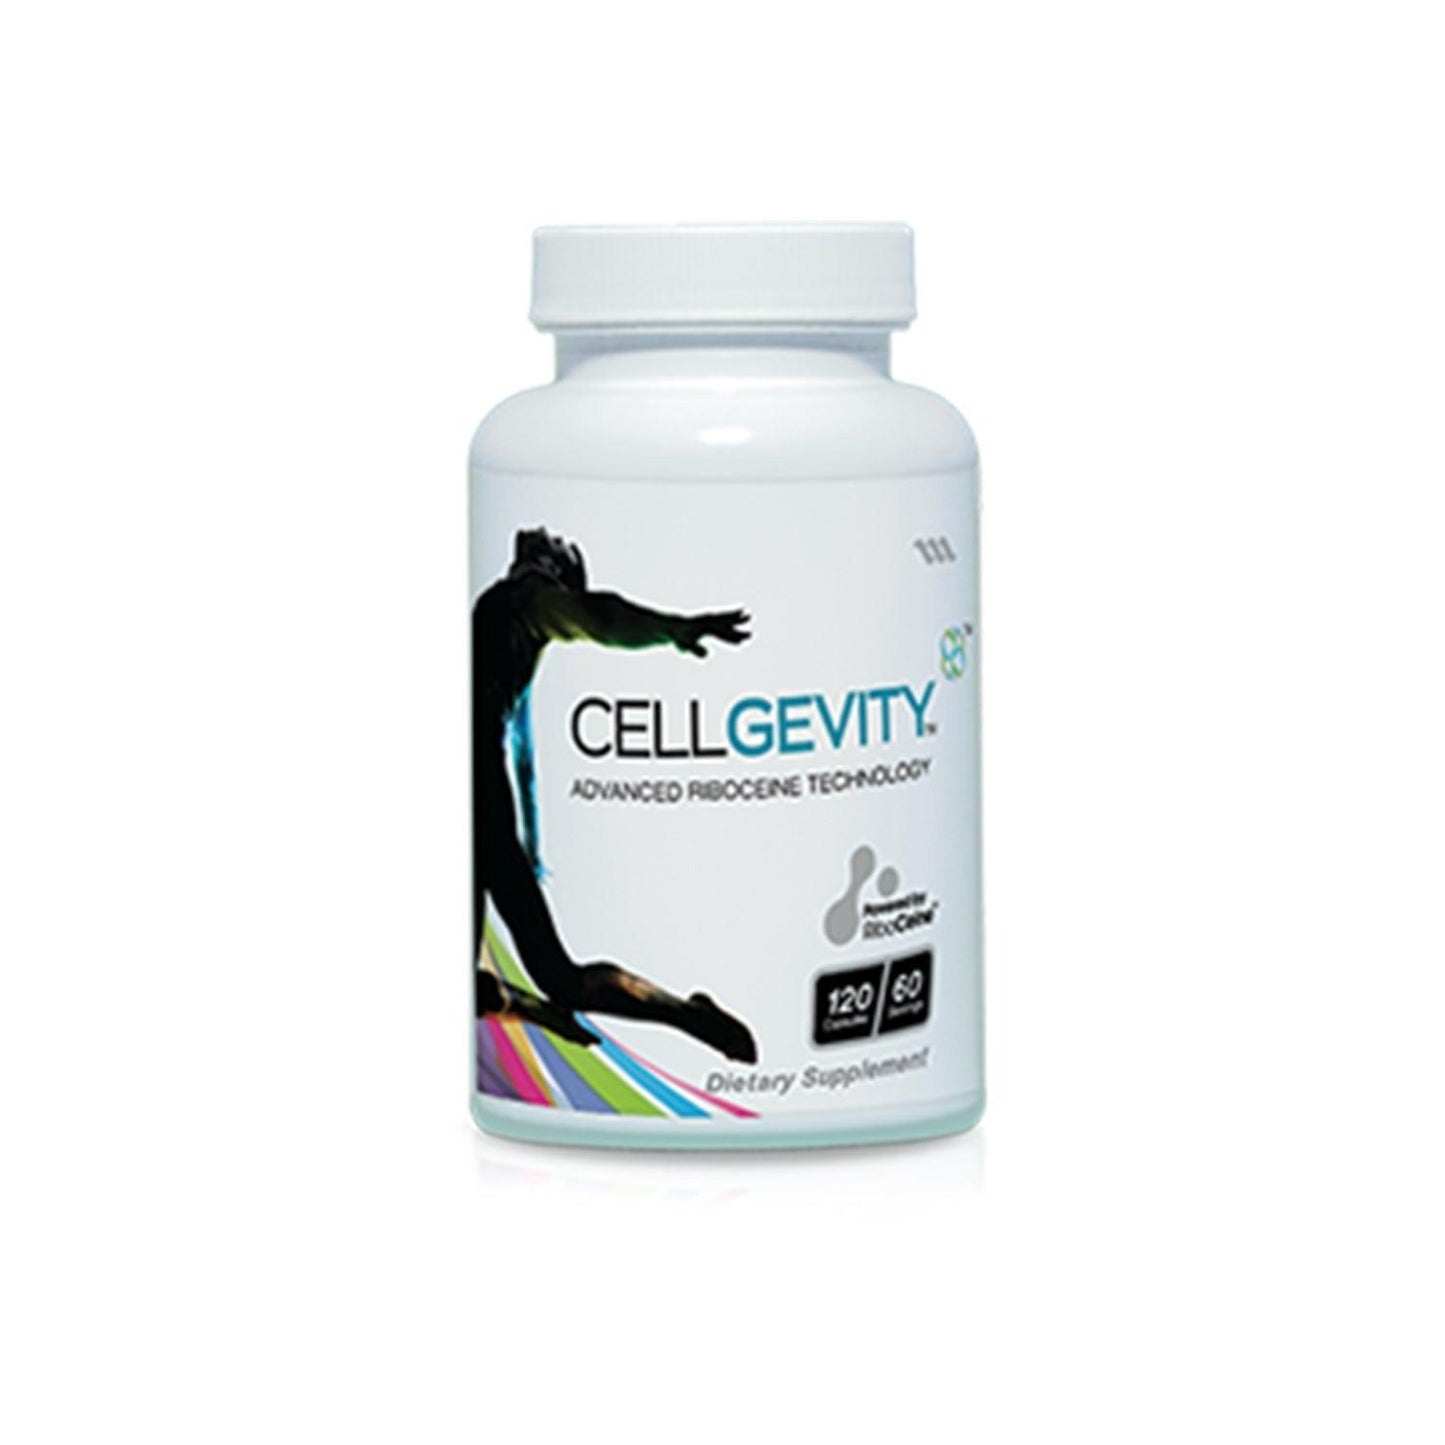 Cellgevity Advanced Riboceine Technology (120 Capsules/monthy supply). - Anjelstore 